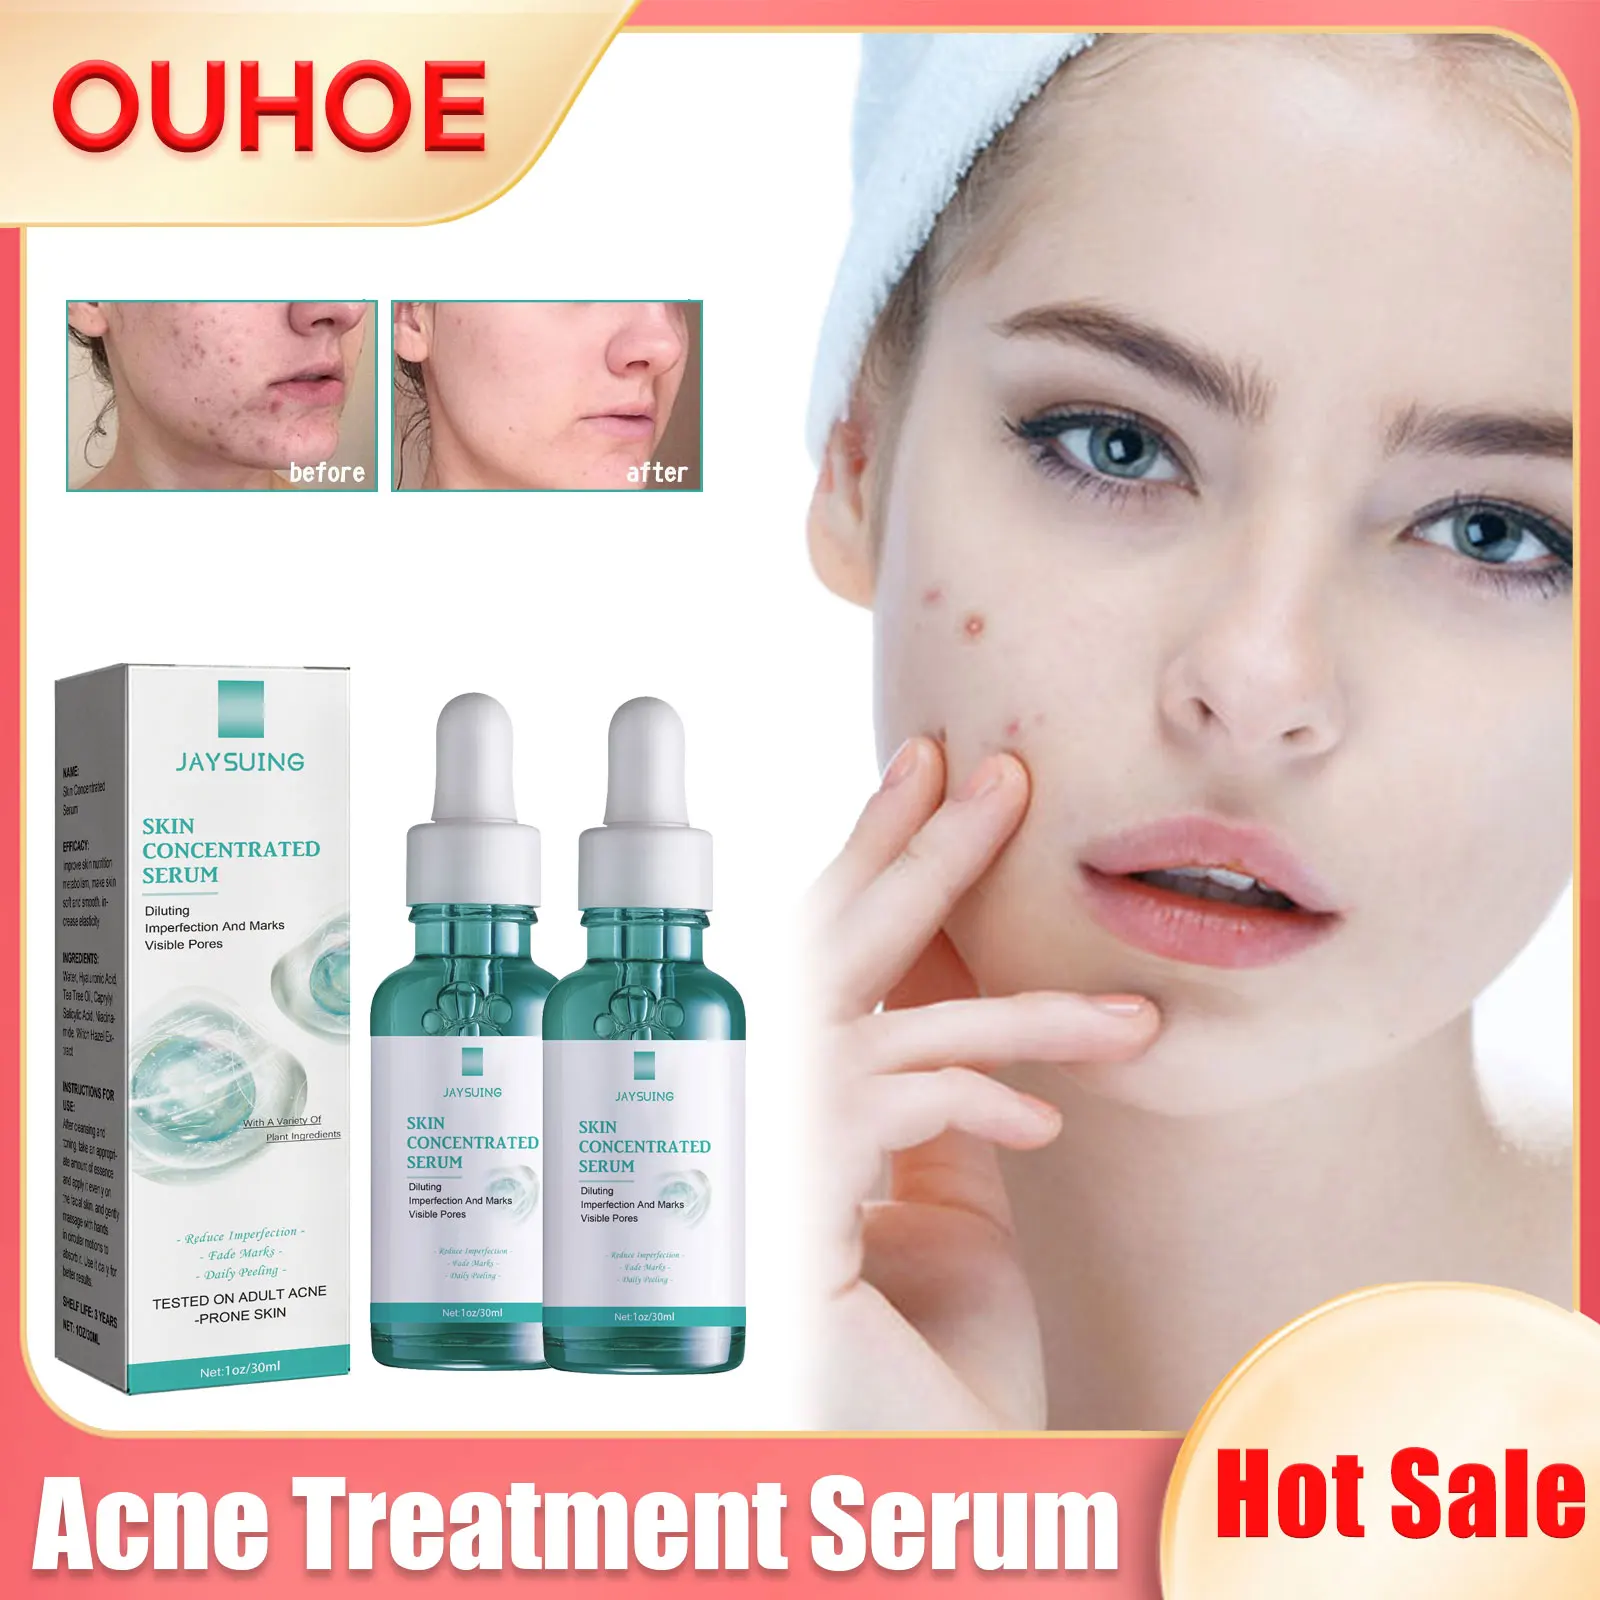 

Acne Remover Serum Smoothing Moisturizing Shrink Pores Hydrating Brighten Repair Oil Control Blemishes Pimples Treatment Essence